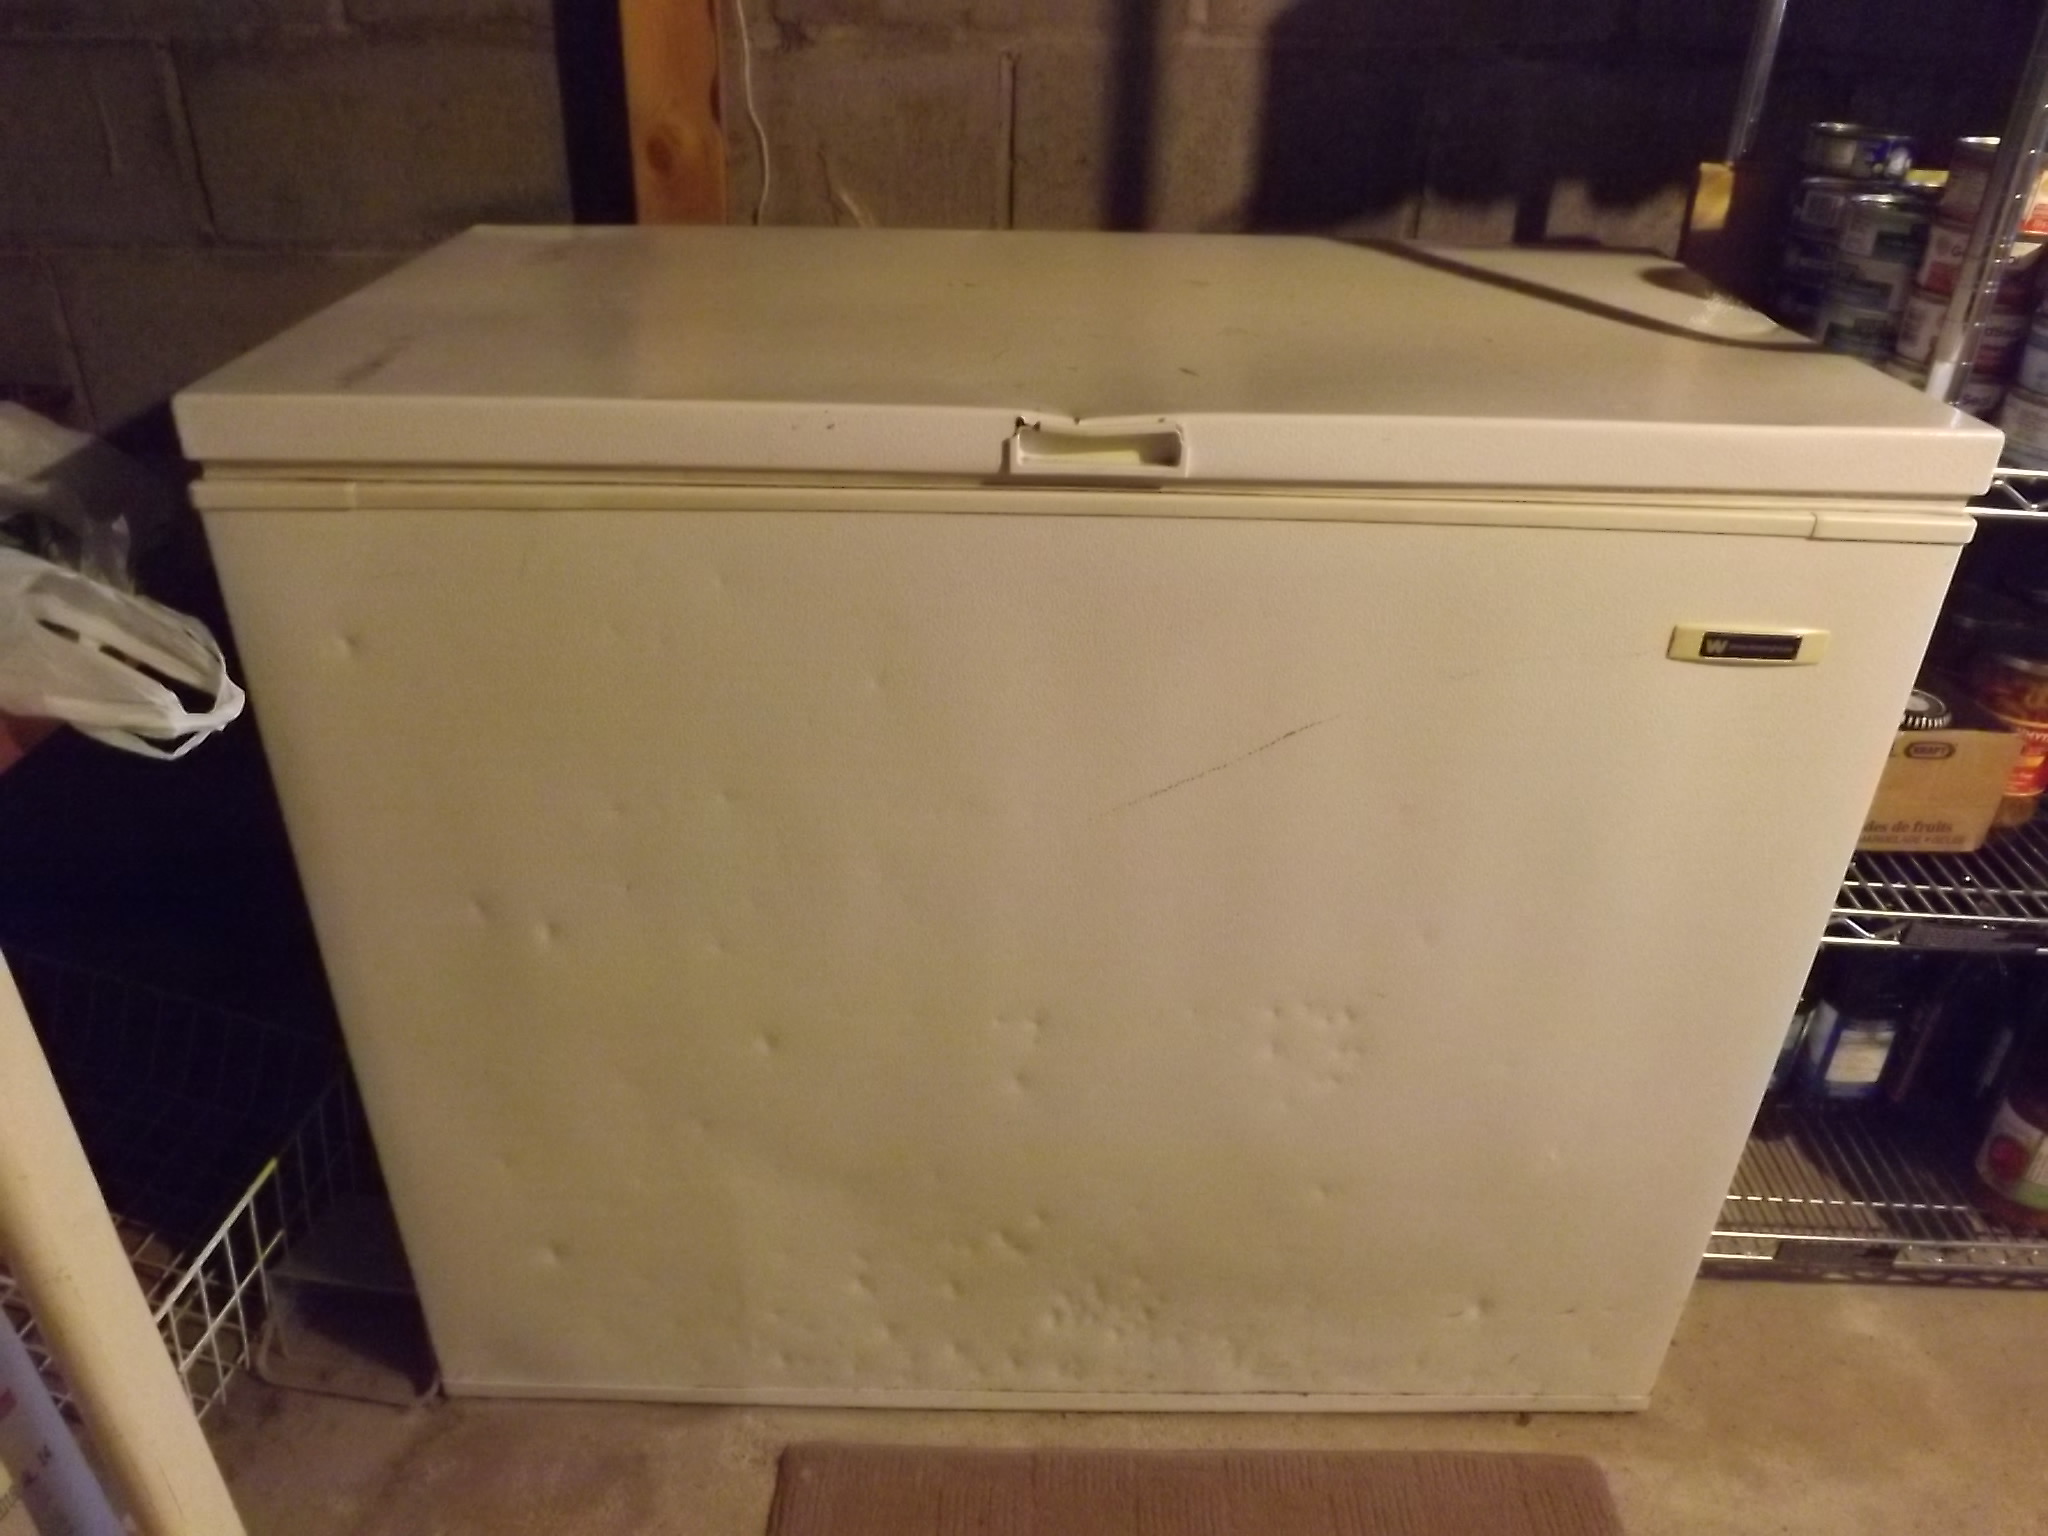 The beat up chest freezer.